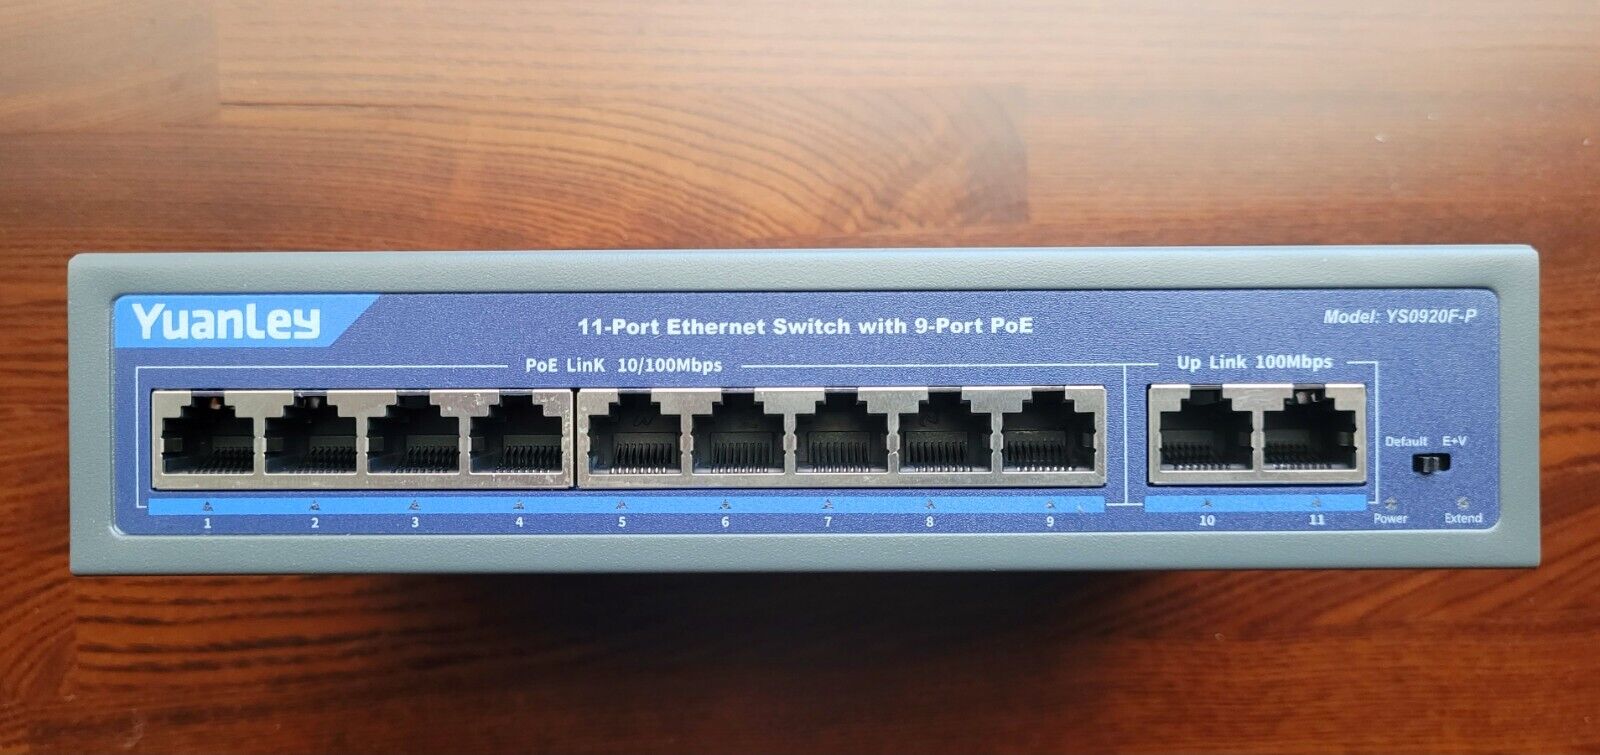 YuanLey 11 Port PoE Switch with 9 Port 10/100Mbps PoE+ 2 Port 100Mbps up link